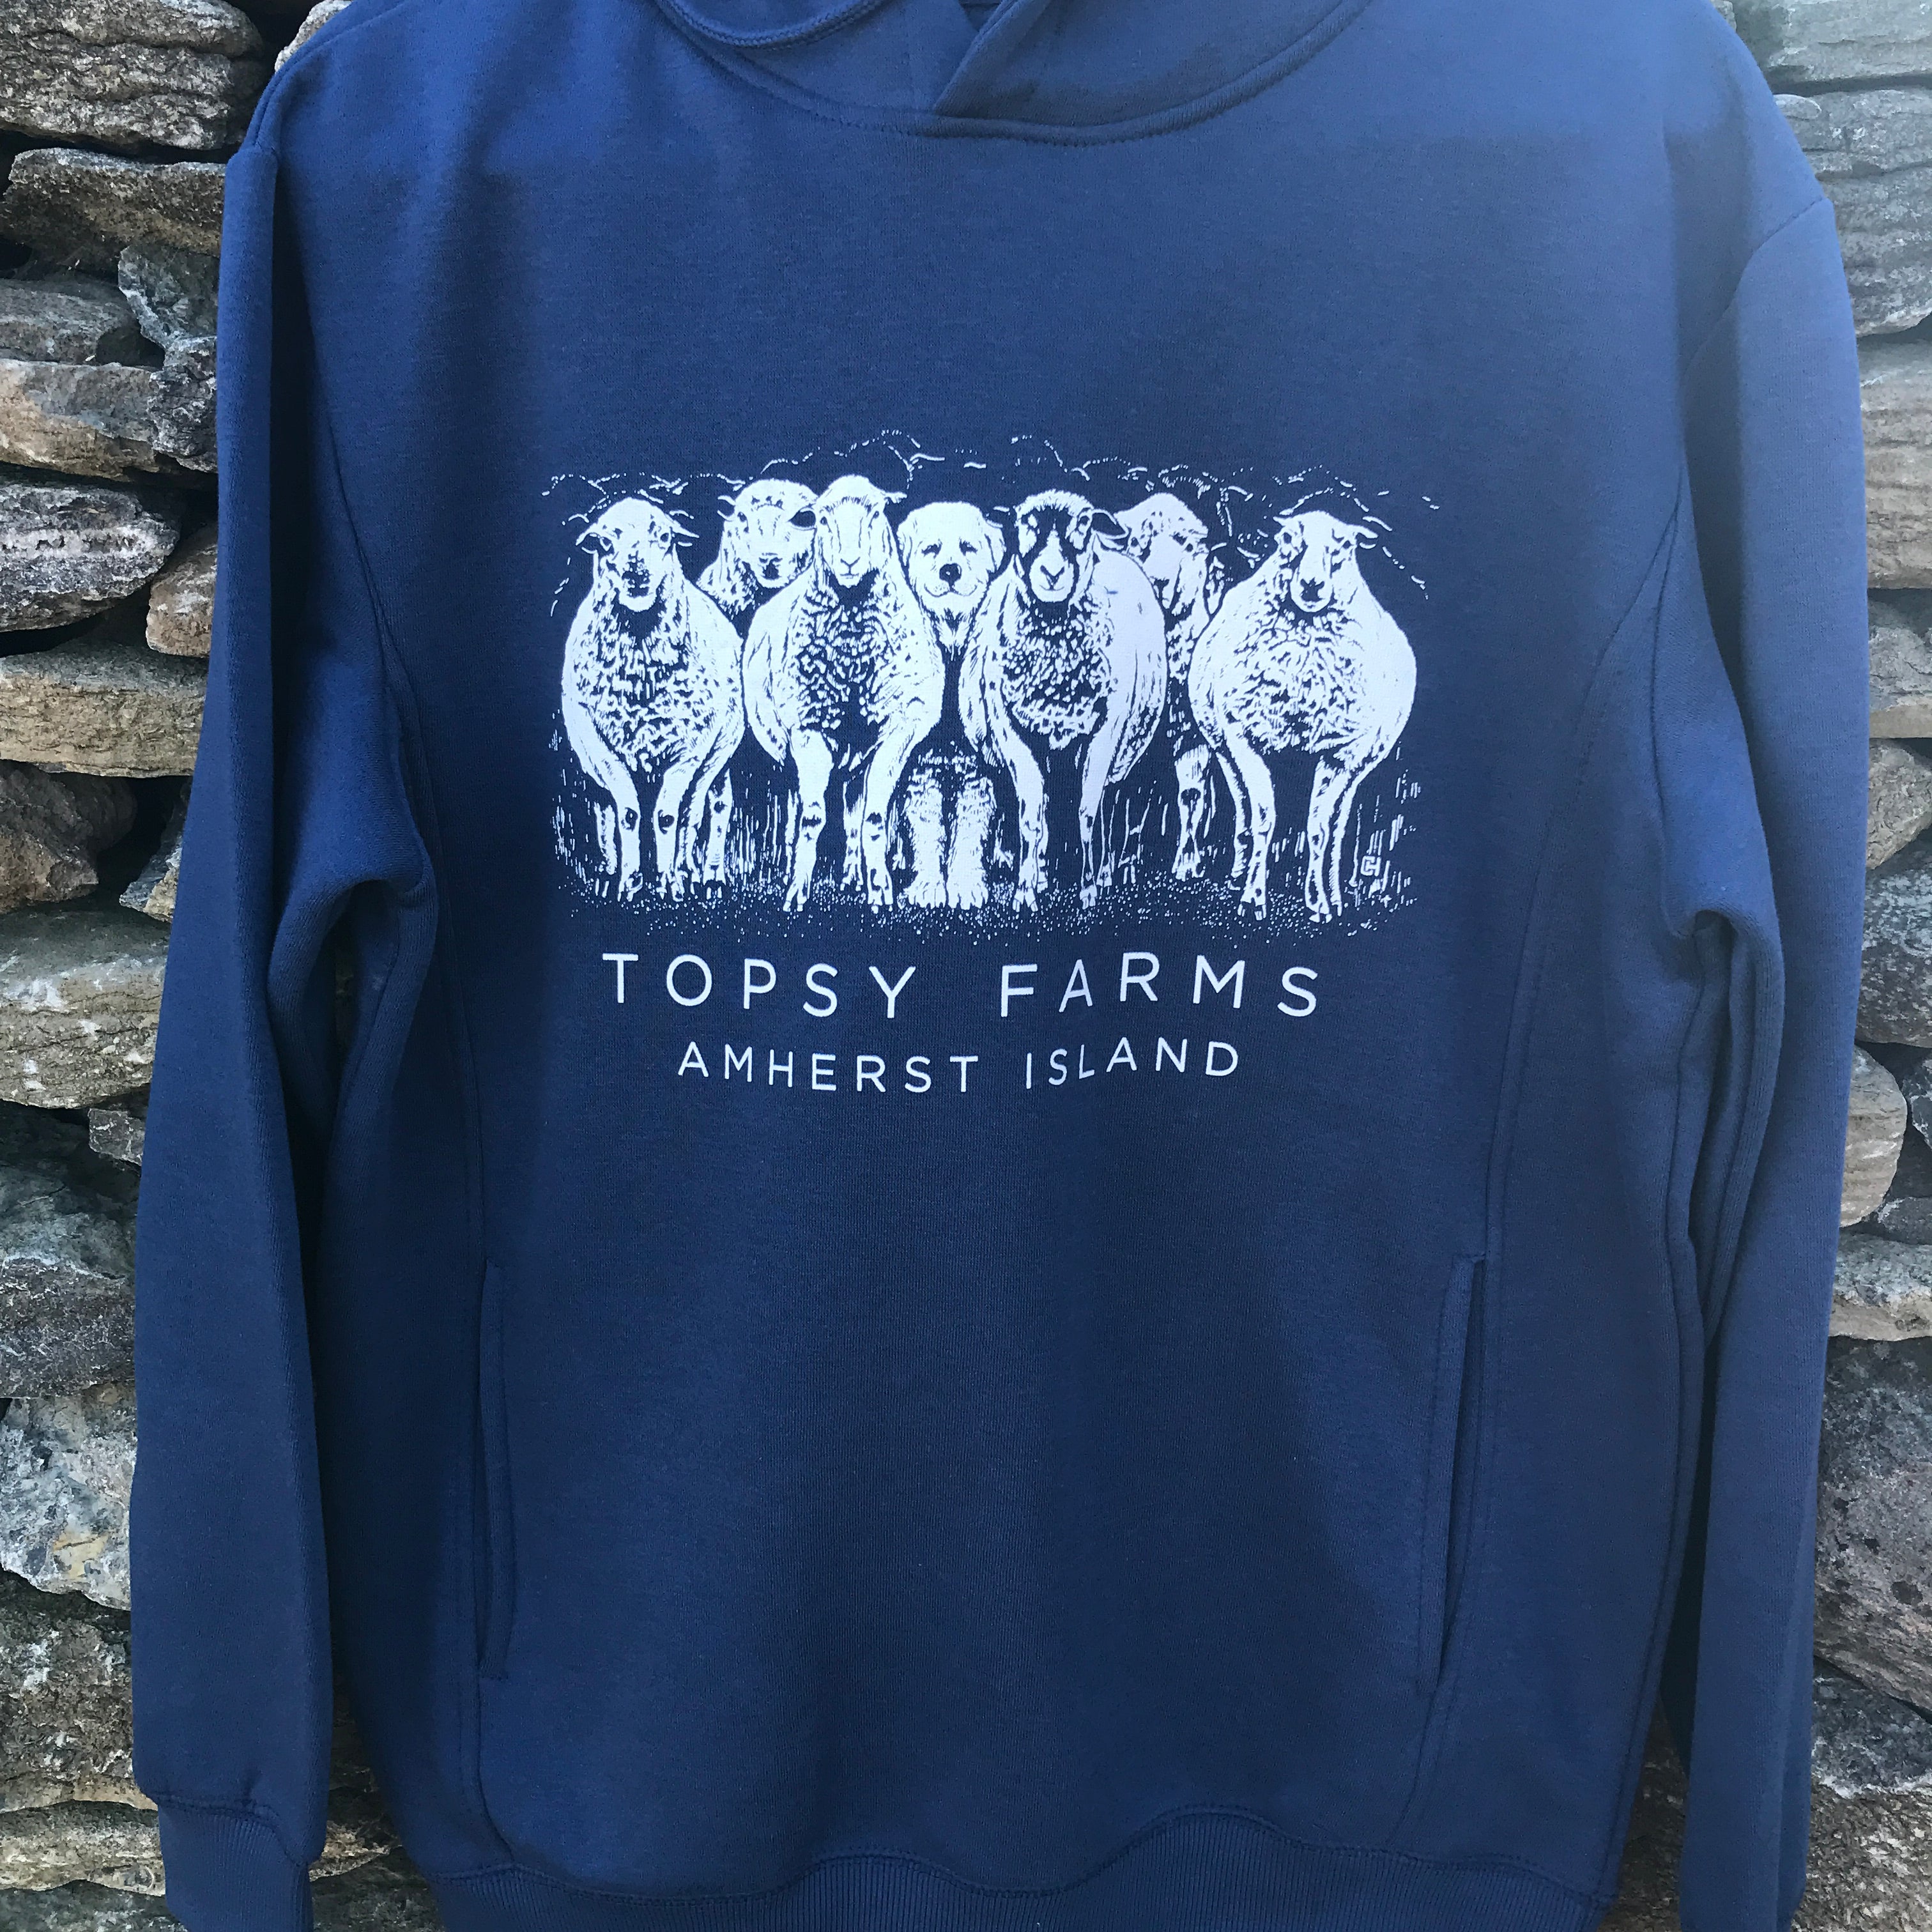 Topsy Farms' sheep and dog hoodie in navy blue